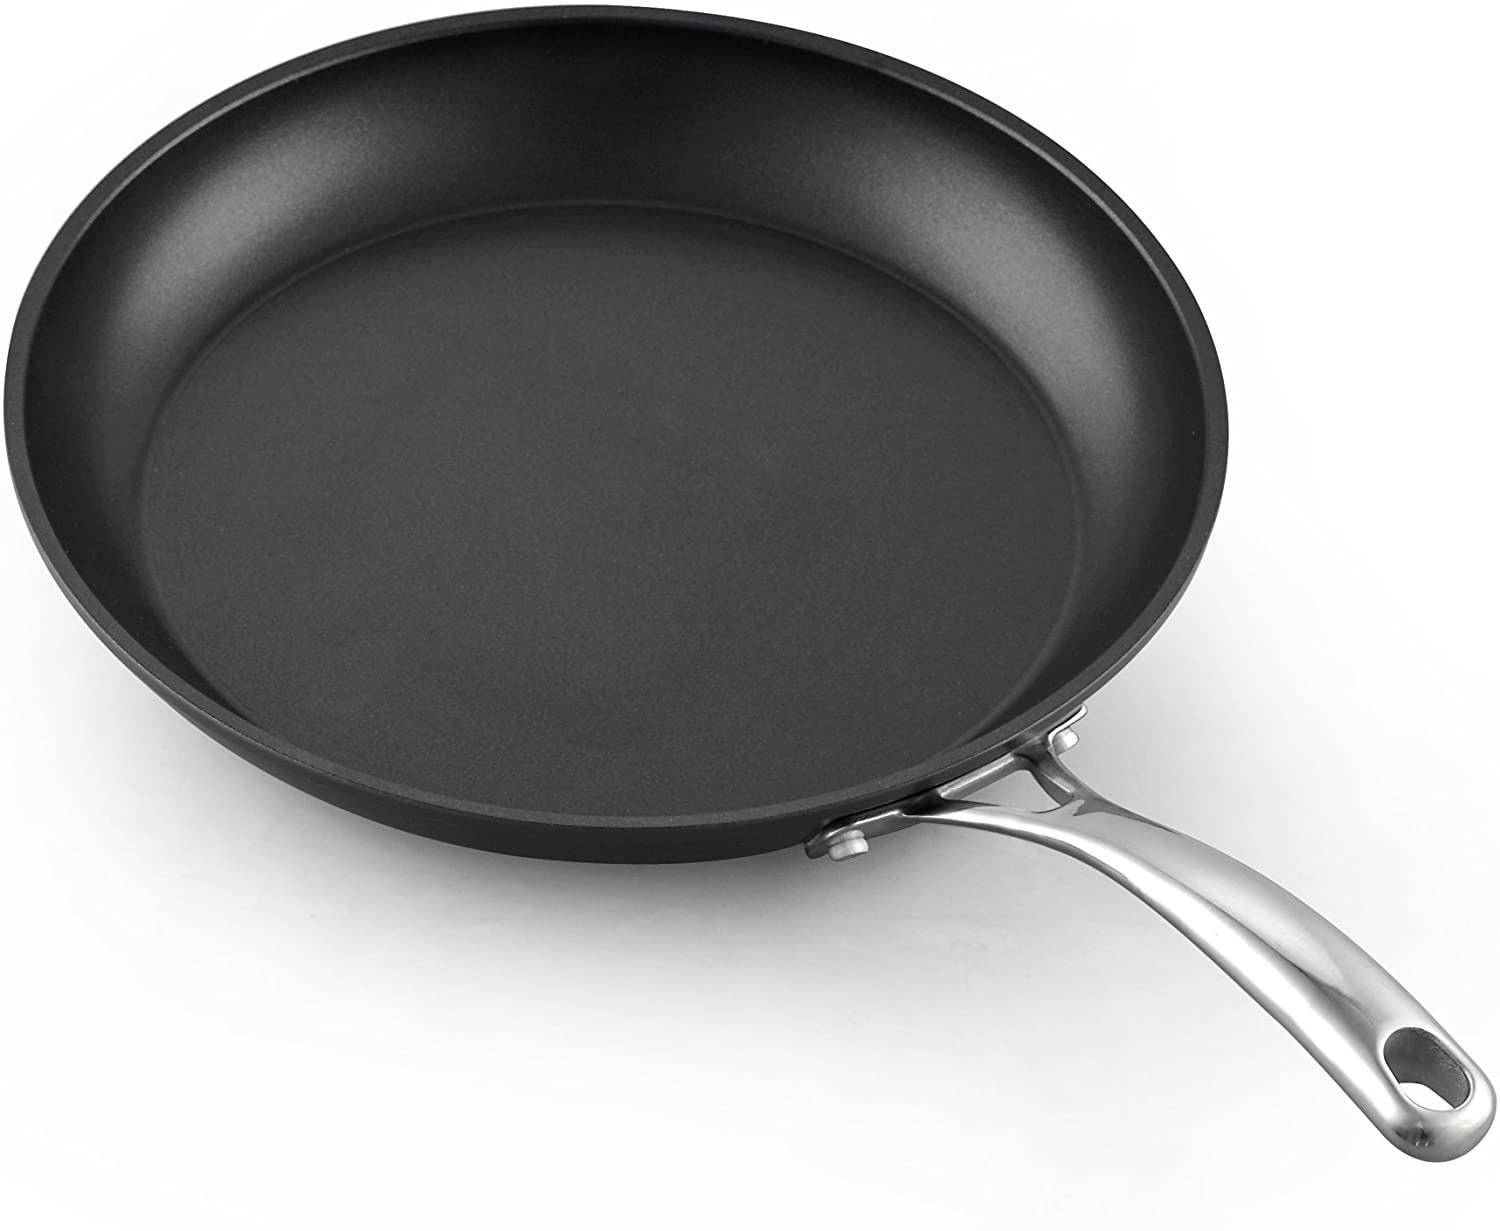 Cooks Standard Frying Omelet Pan, Classic Hard Anodized Nonstick 12-In